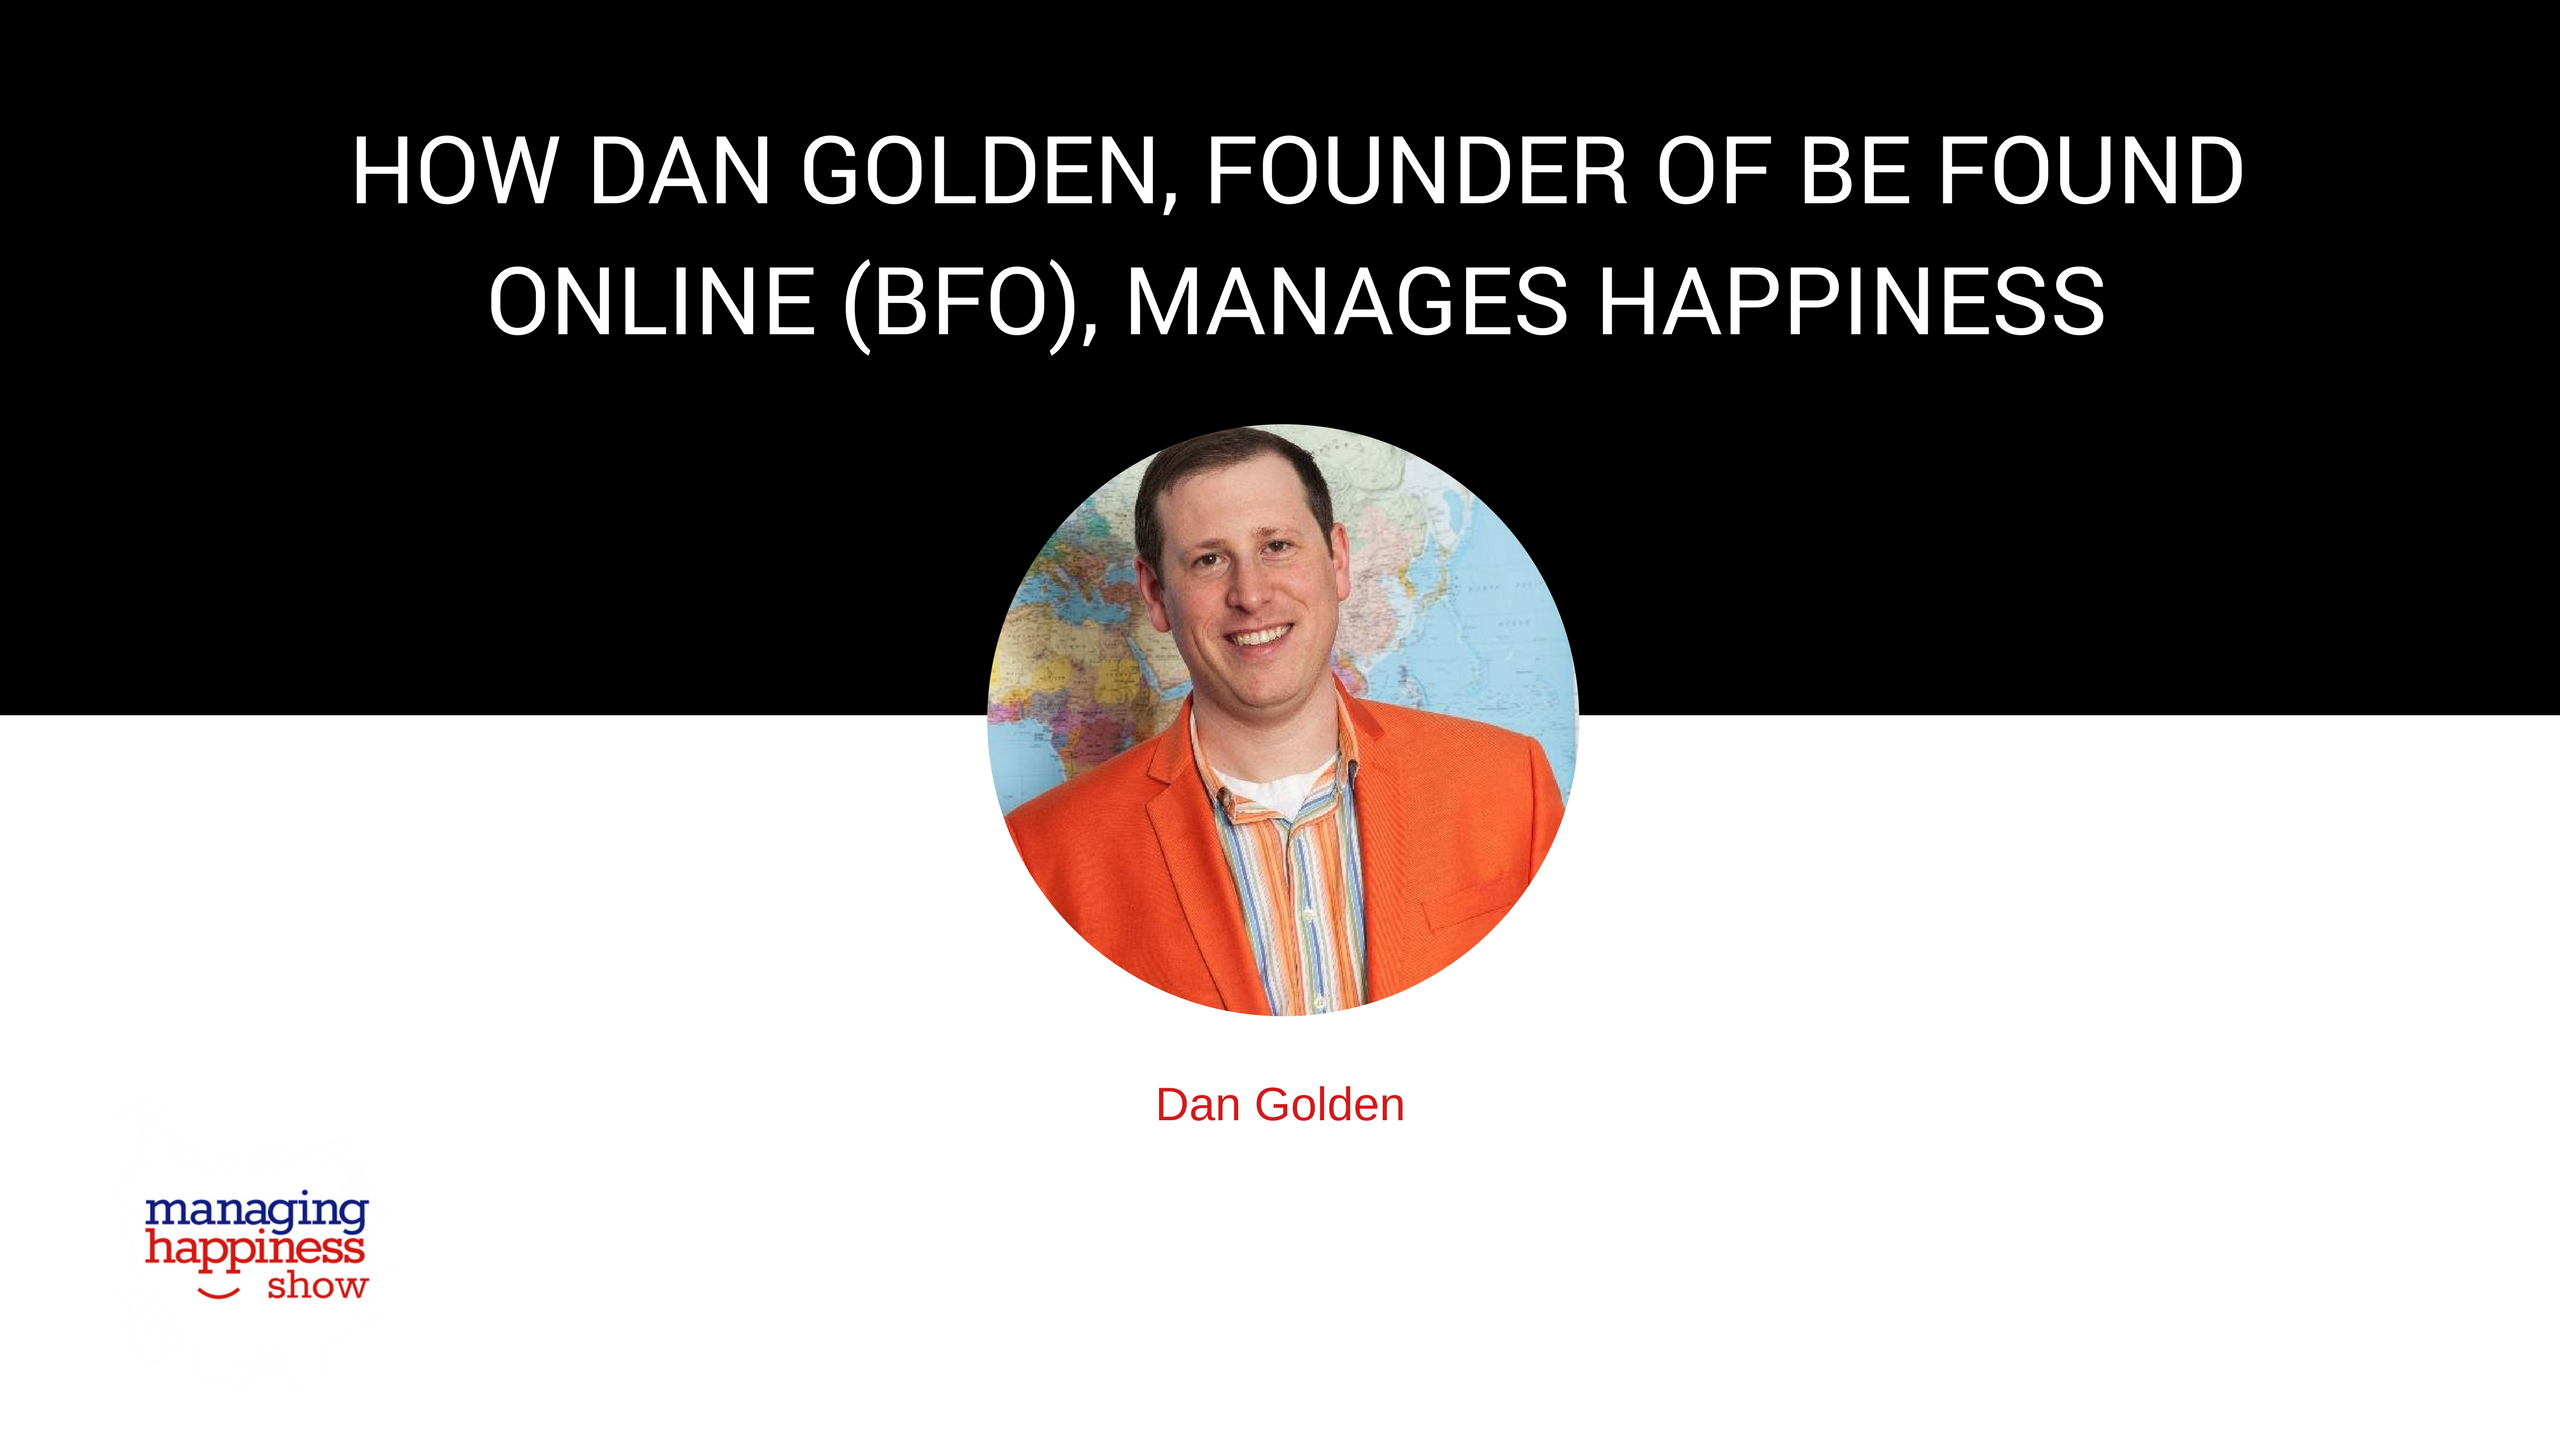 EP. 8: How Dan Golden, Founder of Be Found Online, is Managing Happiness